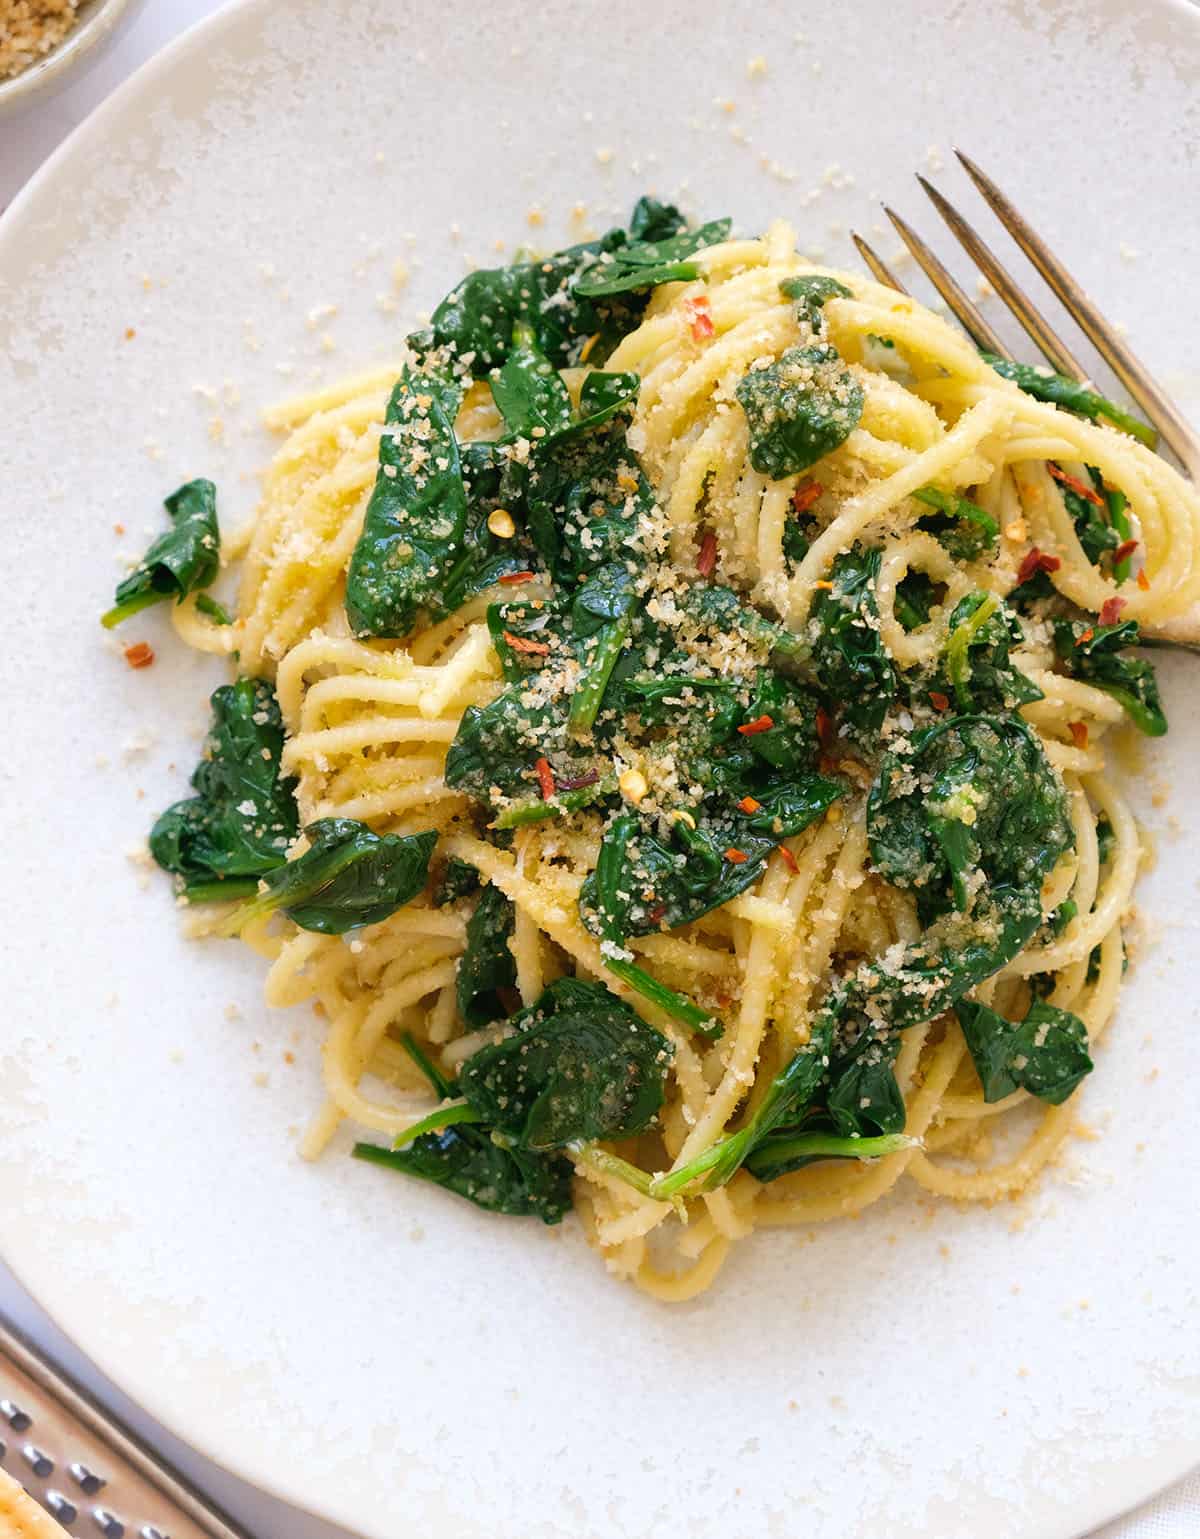 Top view of a white plate full of spinach spaghetti with garlic breadcrumbs and chilli flakes.